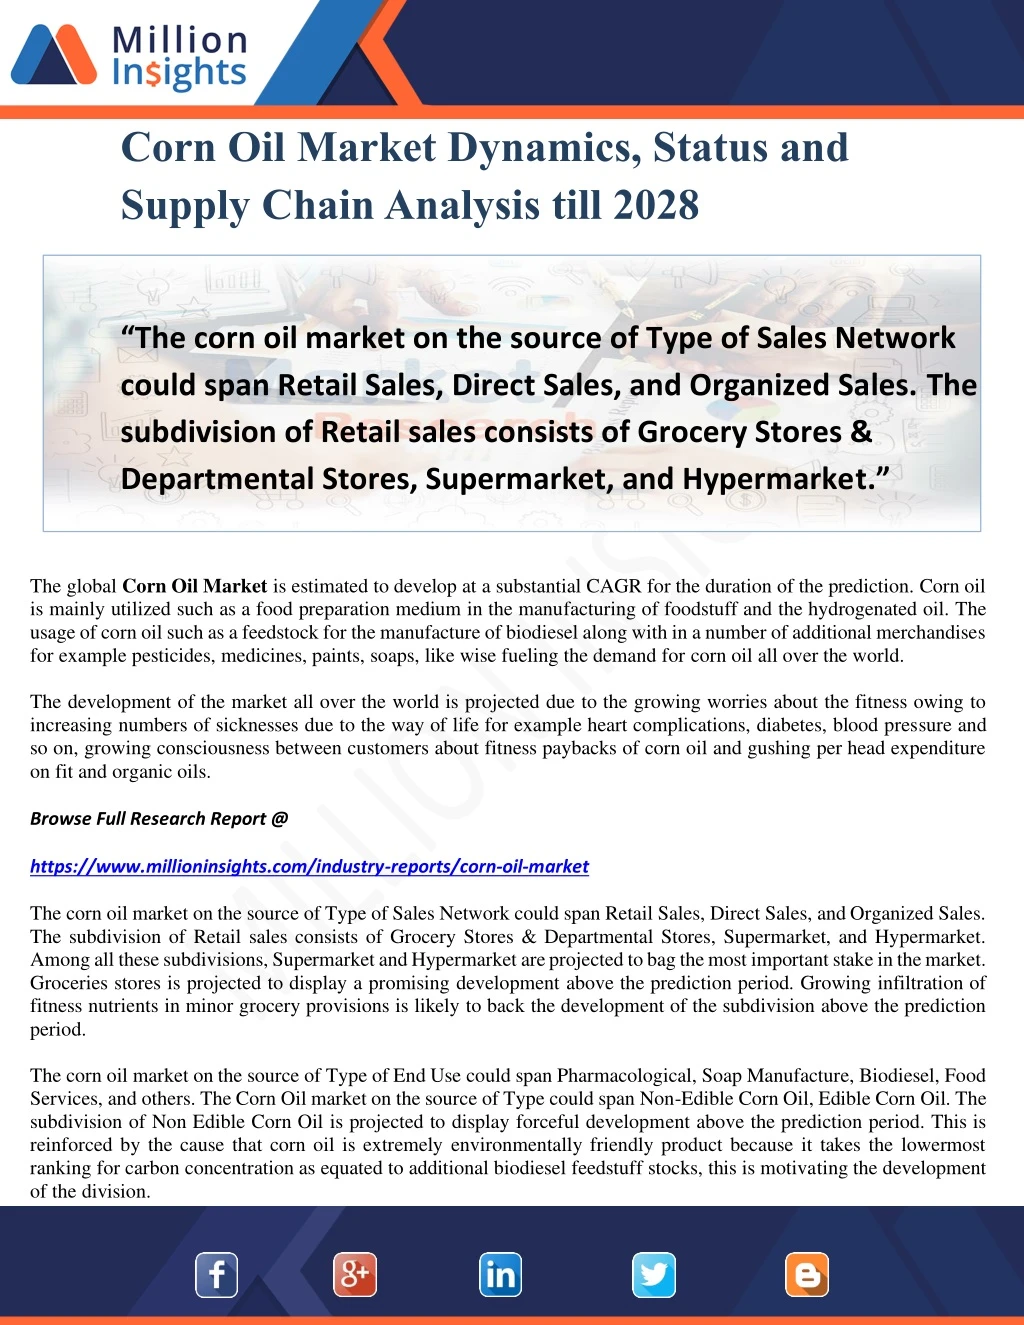 corn oil market dynamics status and supply chain